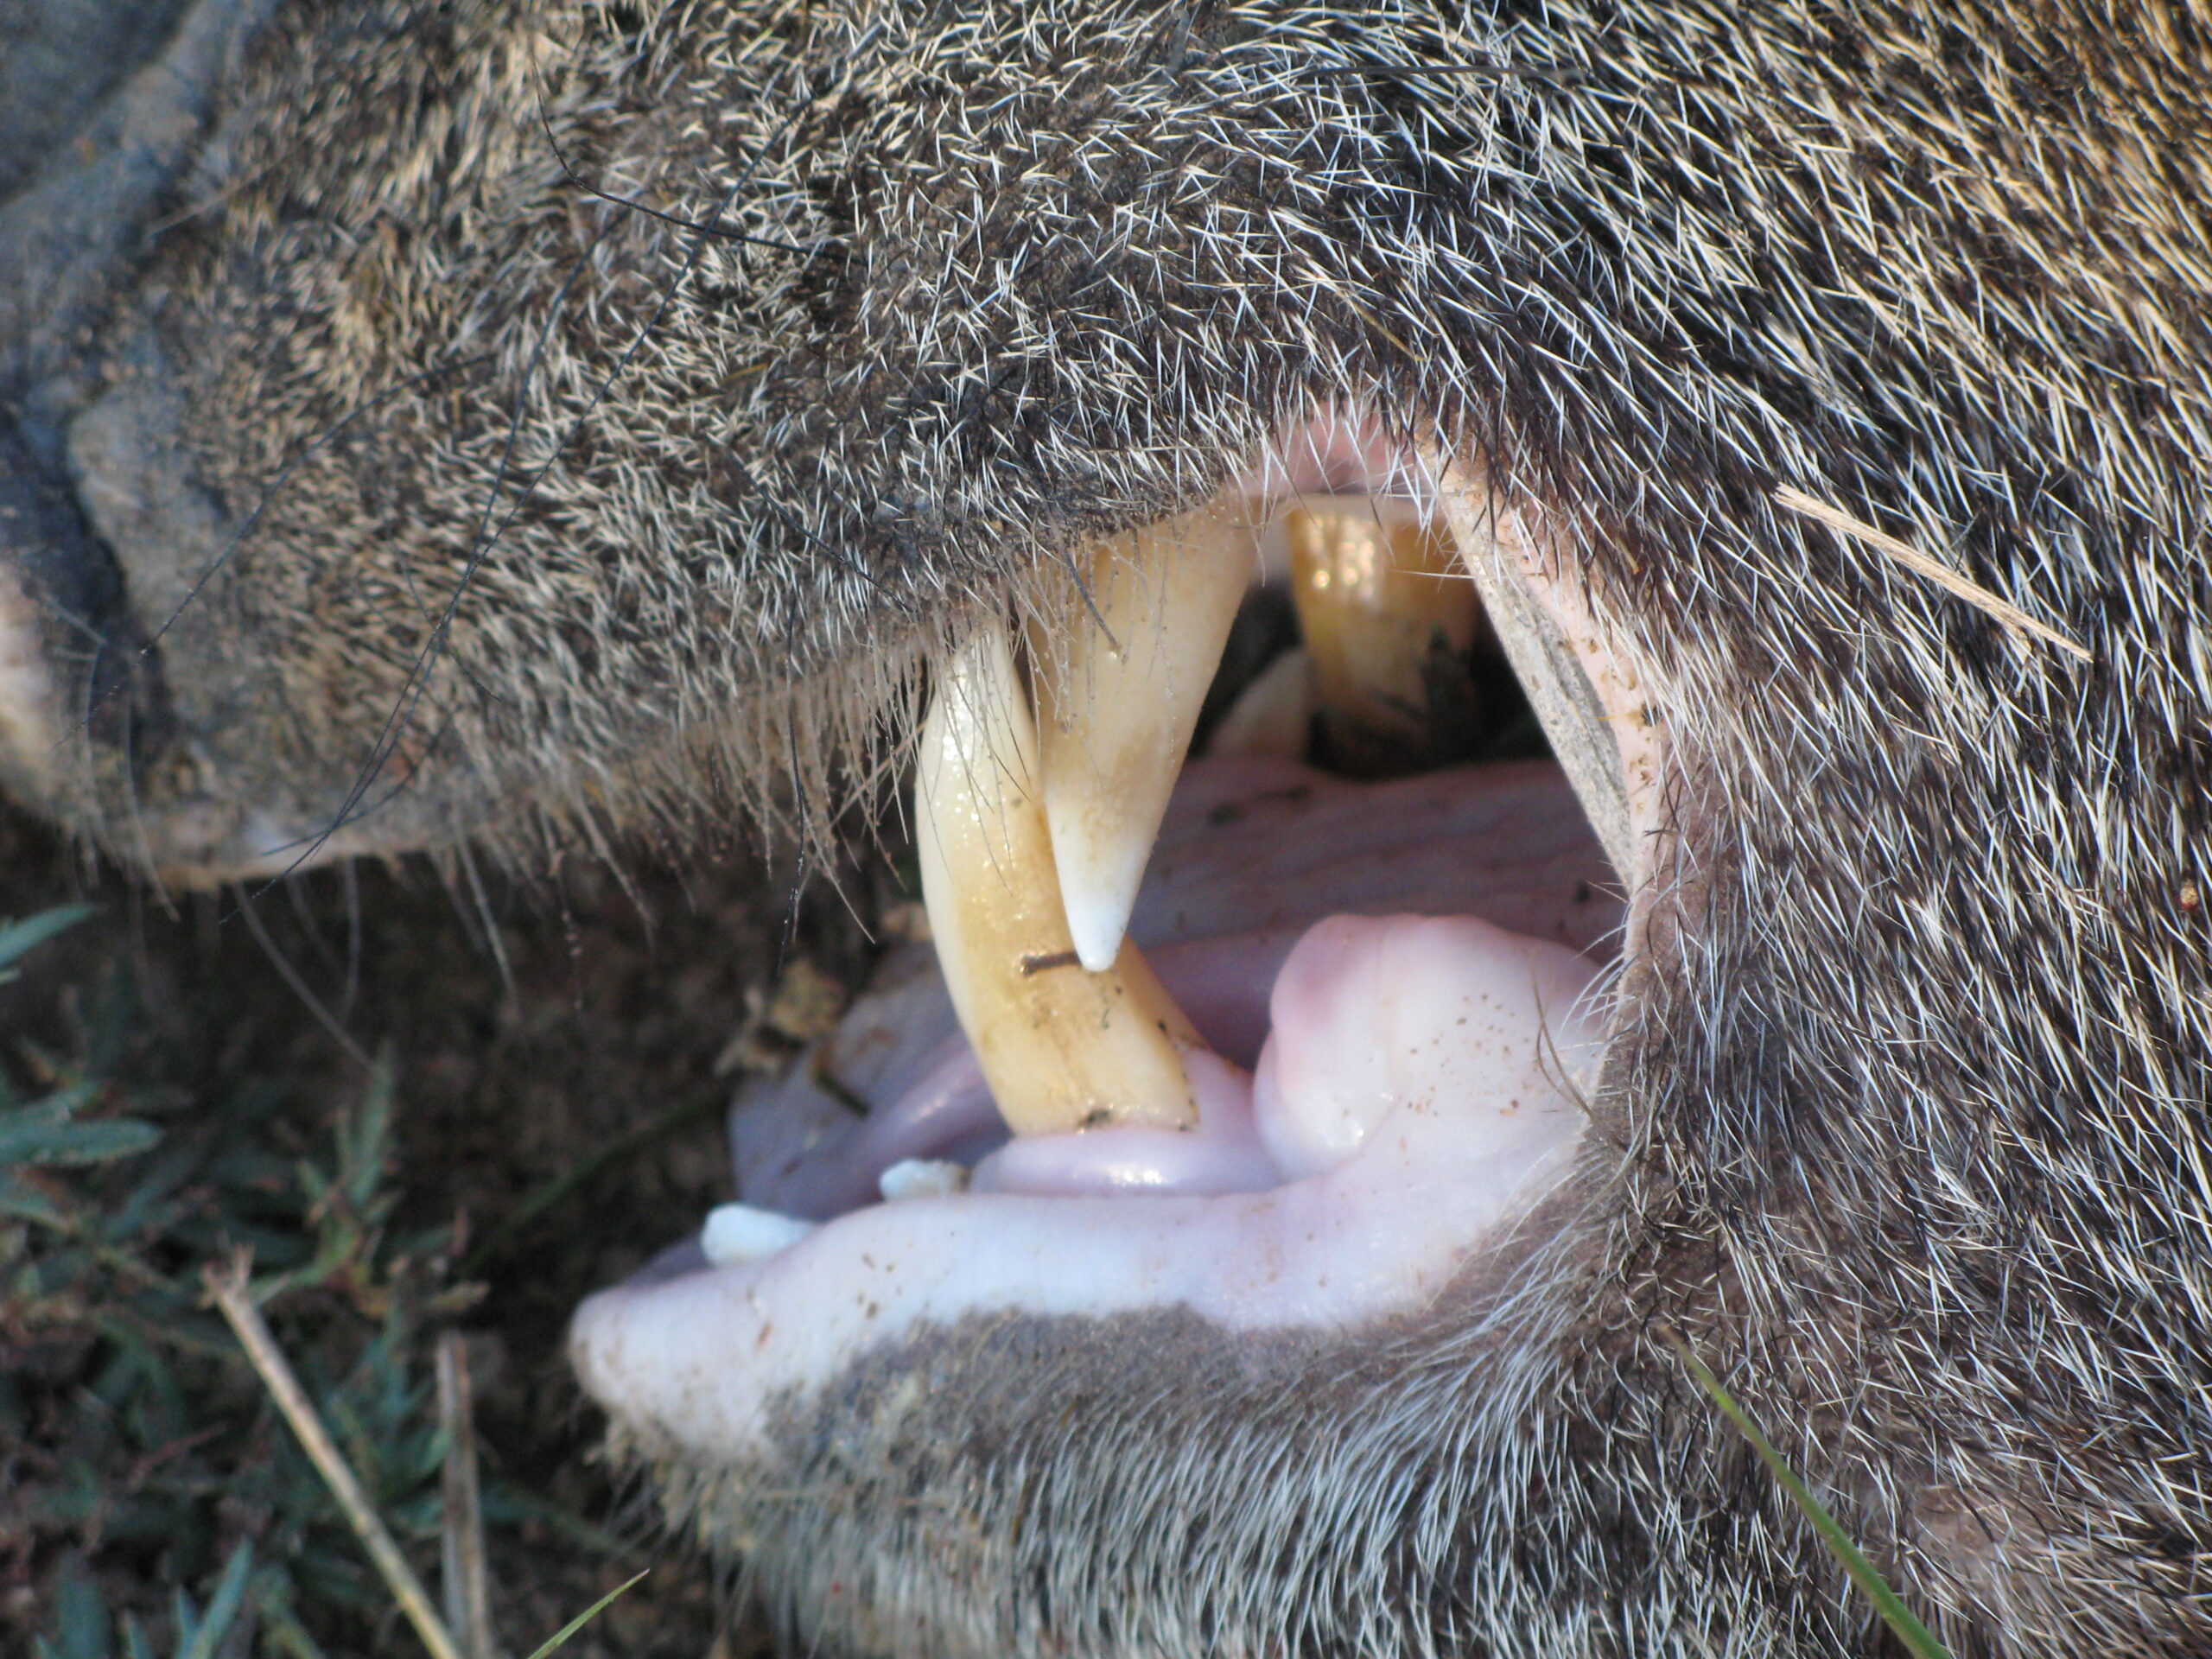 Check out the chompers on that javelina.